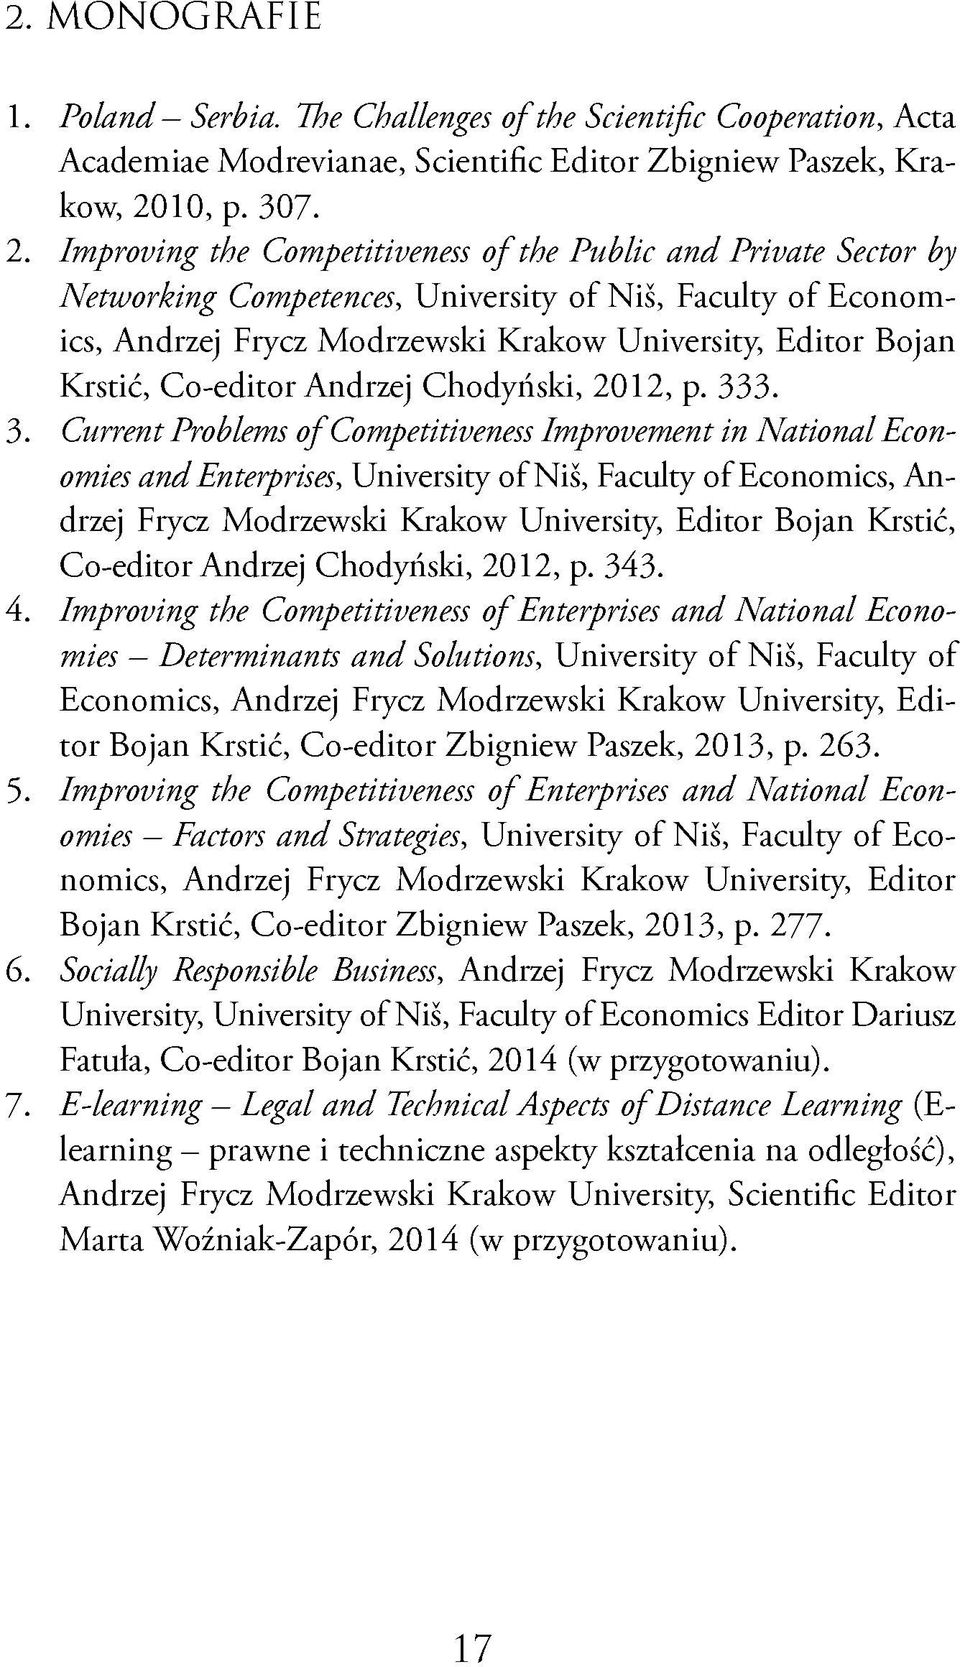 Improving the Competitiveness o f the Public and Private Sector by Networking Competences, University of Nis, Faculty of Economics, Andrzej Frycz Modrzewski Krakow University, Editor Bojan Krstić,